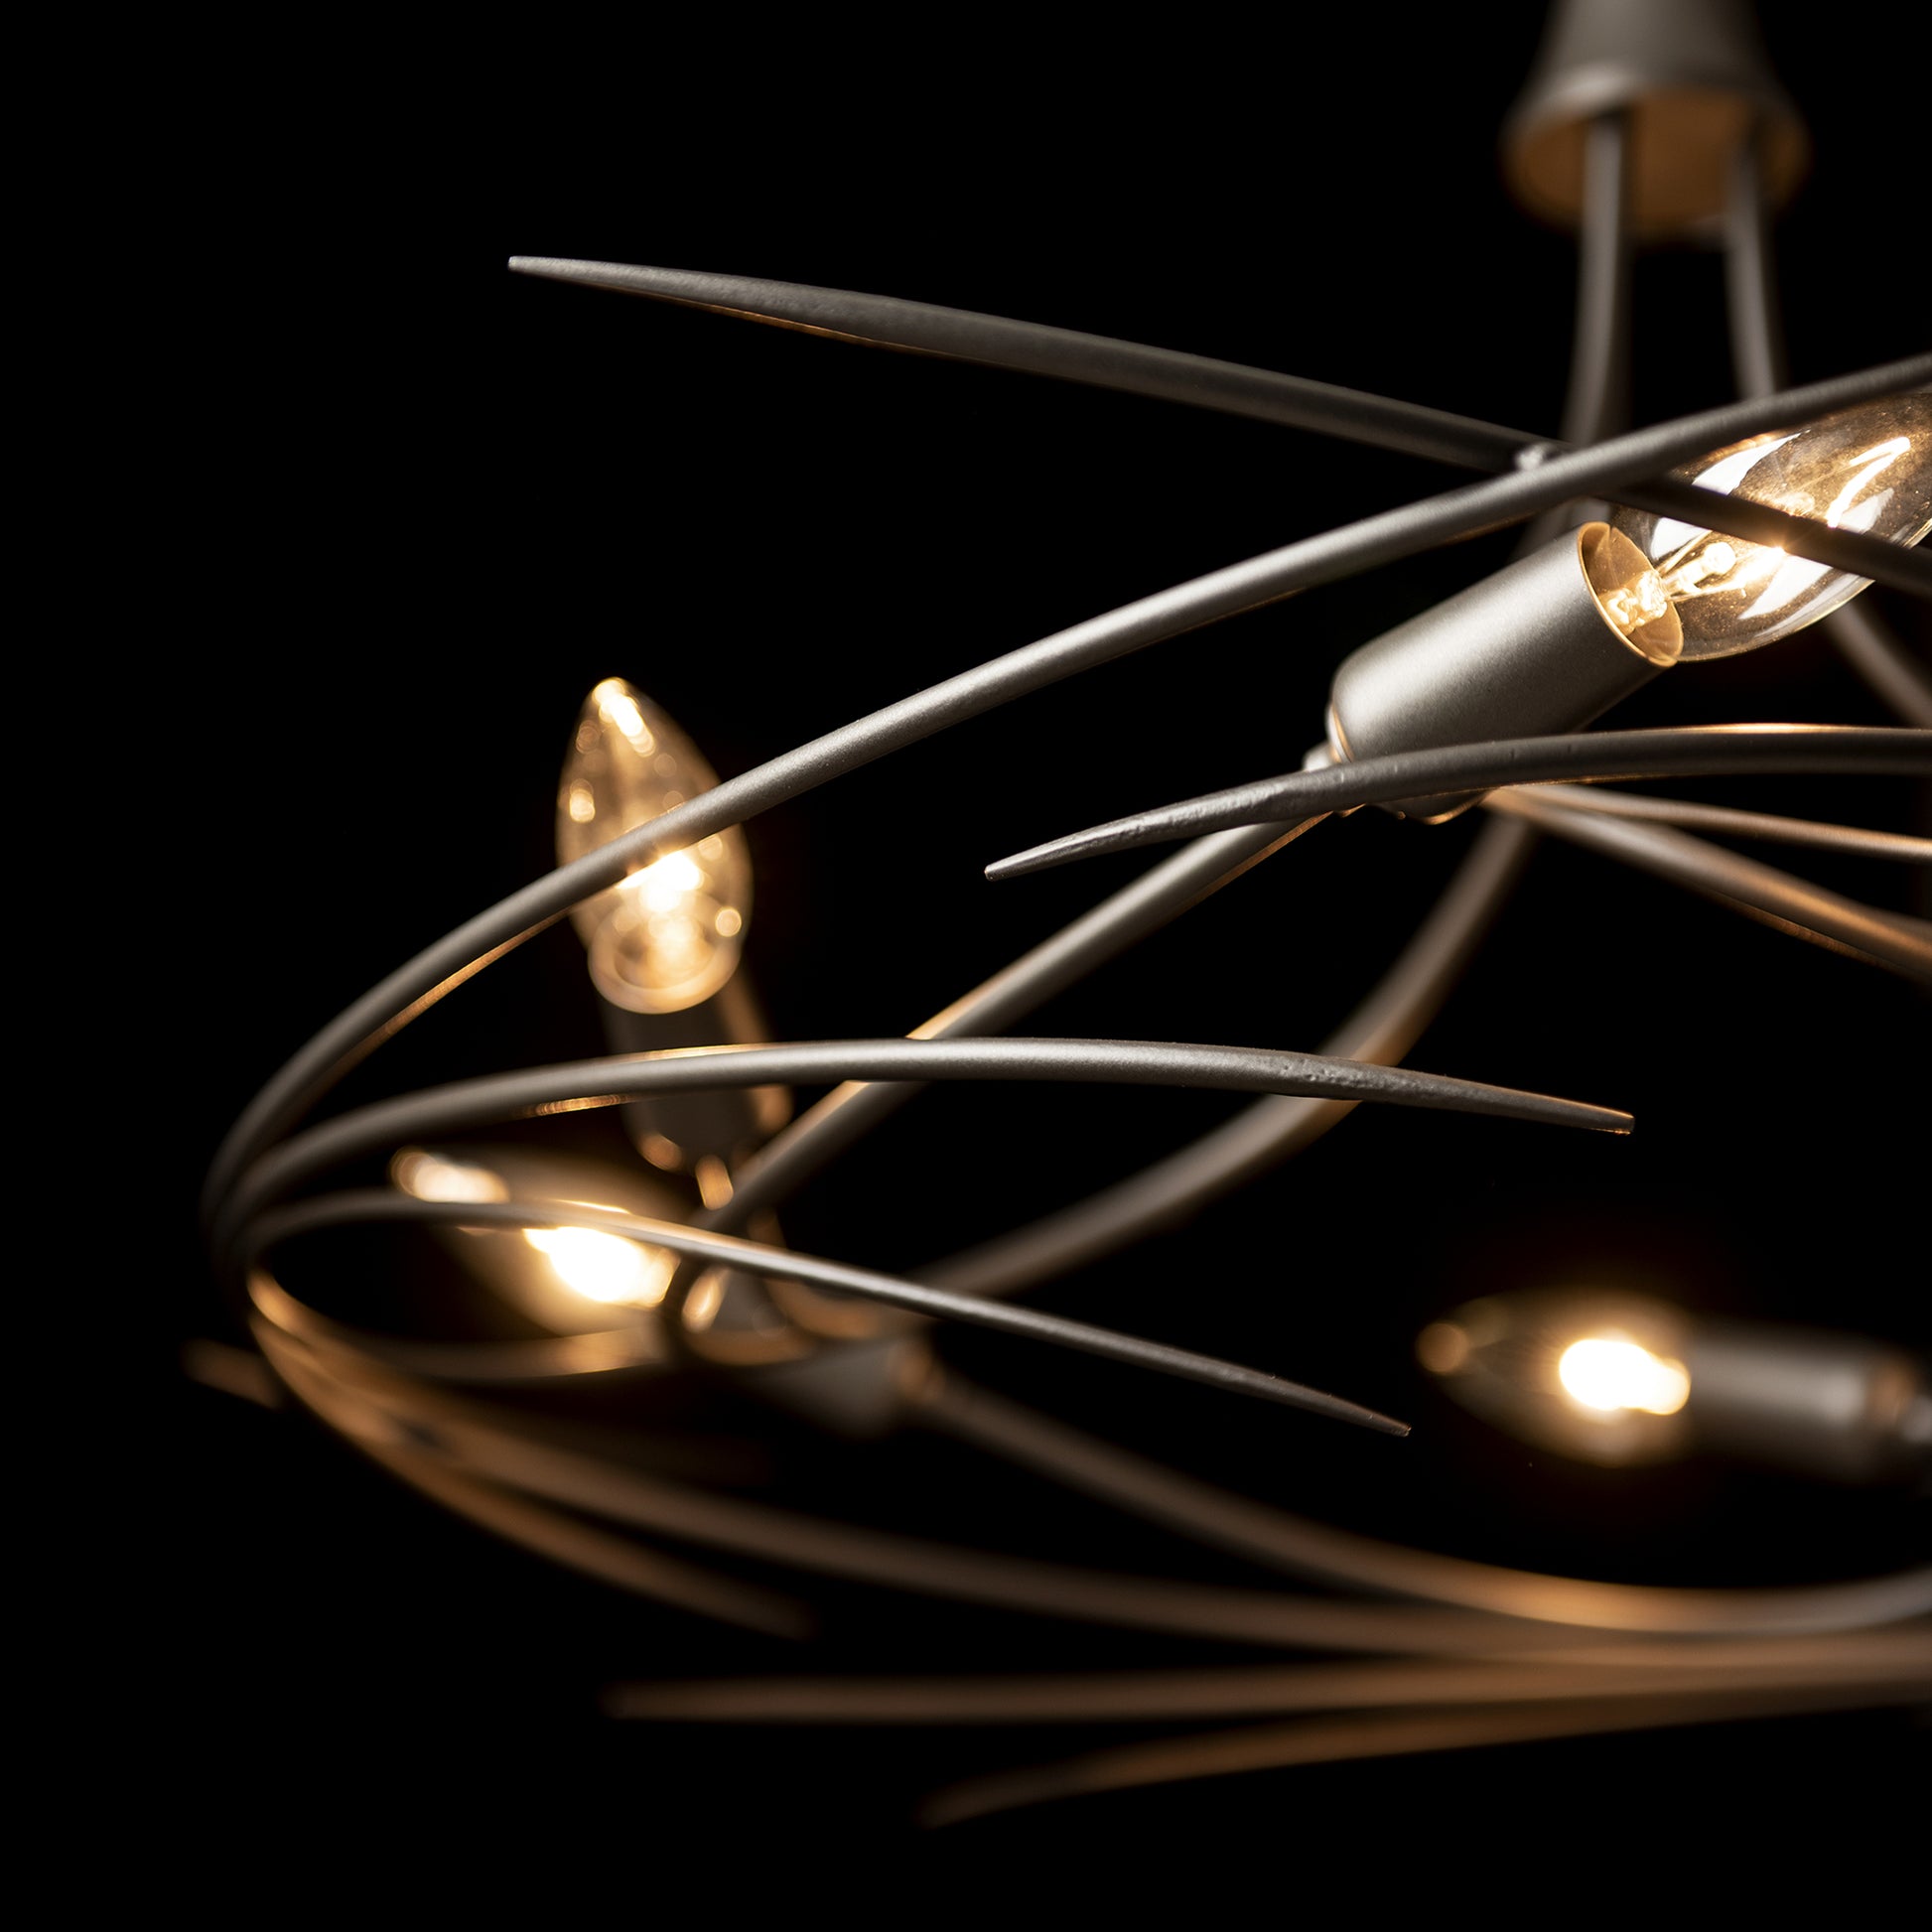 The Hubbardton Forge Wisp 6-Light Chandelier showcases an elegant silhouette with its fine tailoring, featuring stunning lights that beautifully illuminate any space.